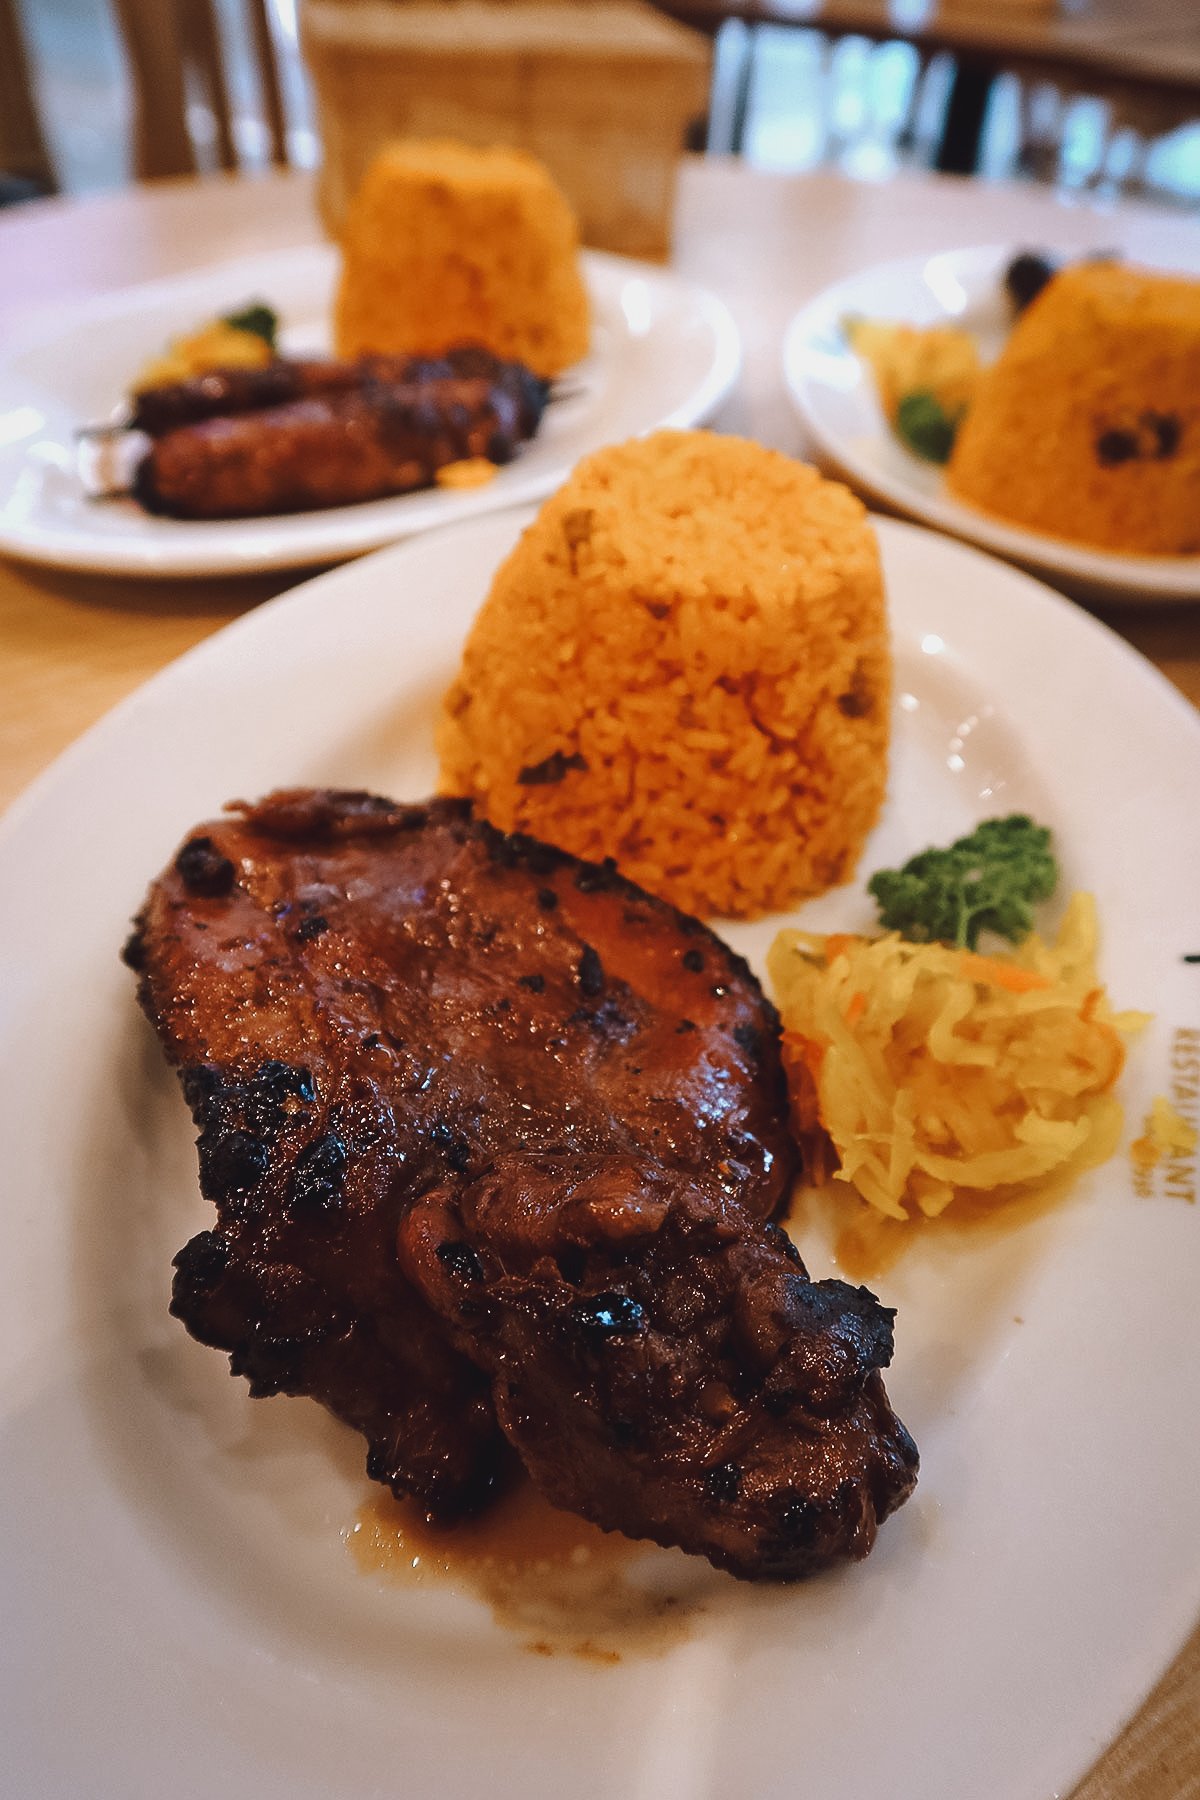 Barbecued chicken at a restaurant in Manila